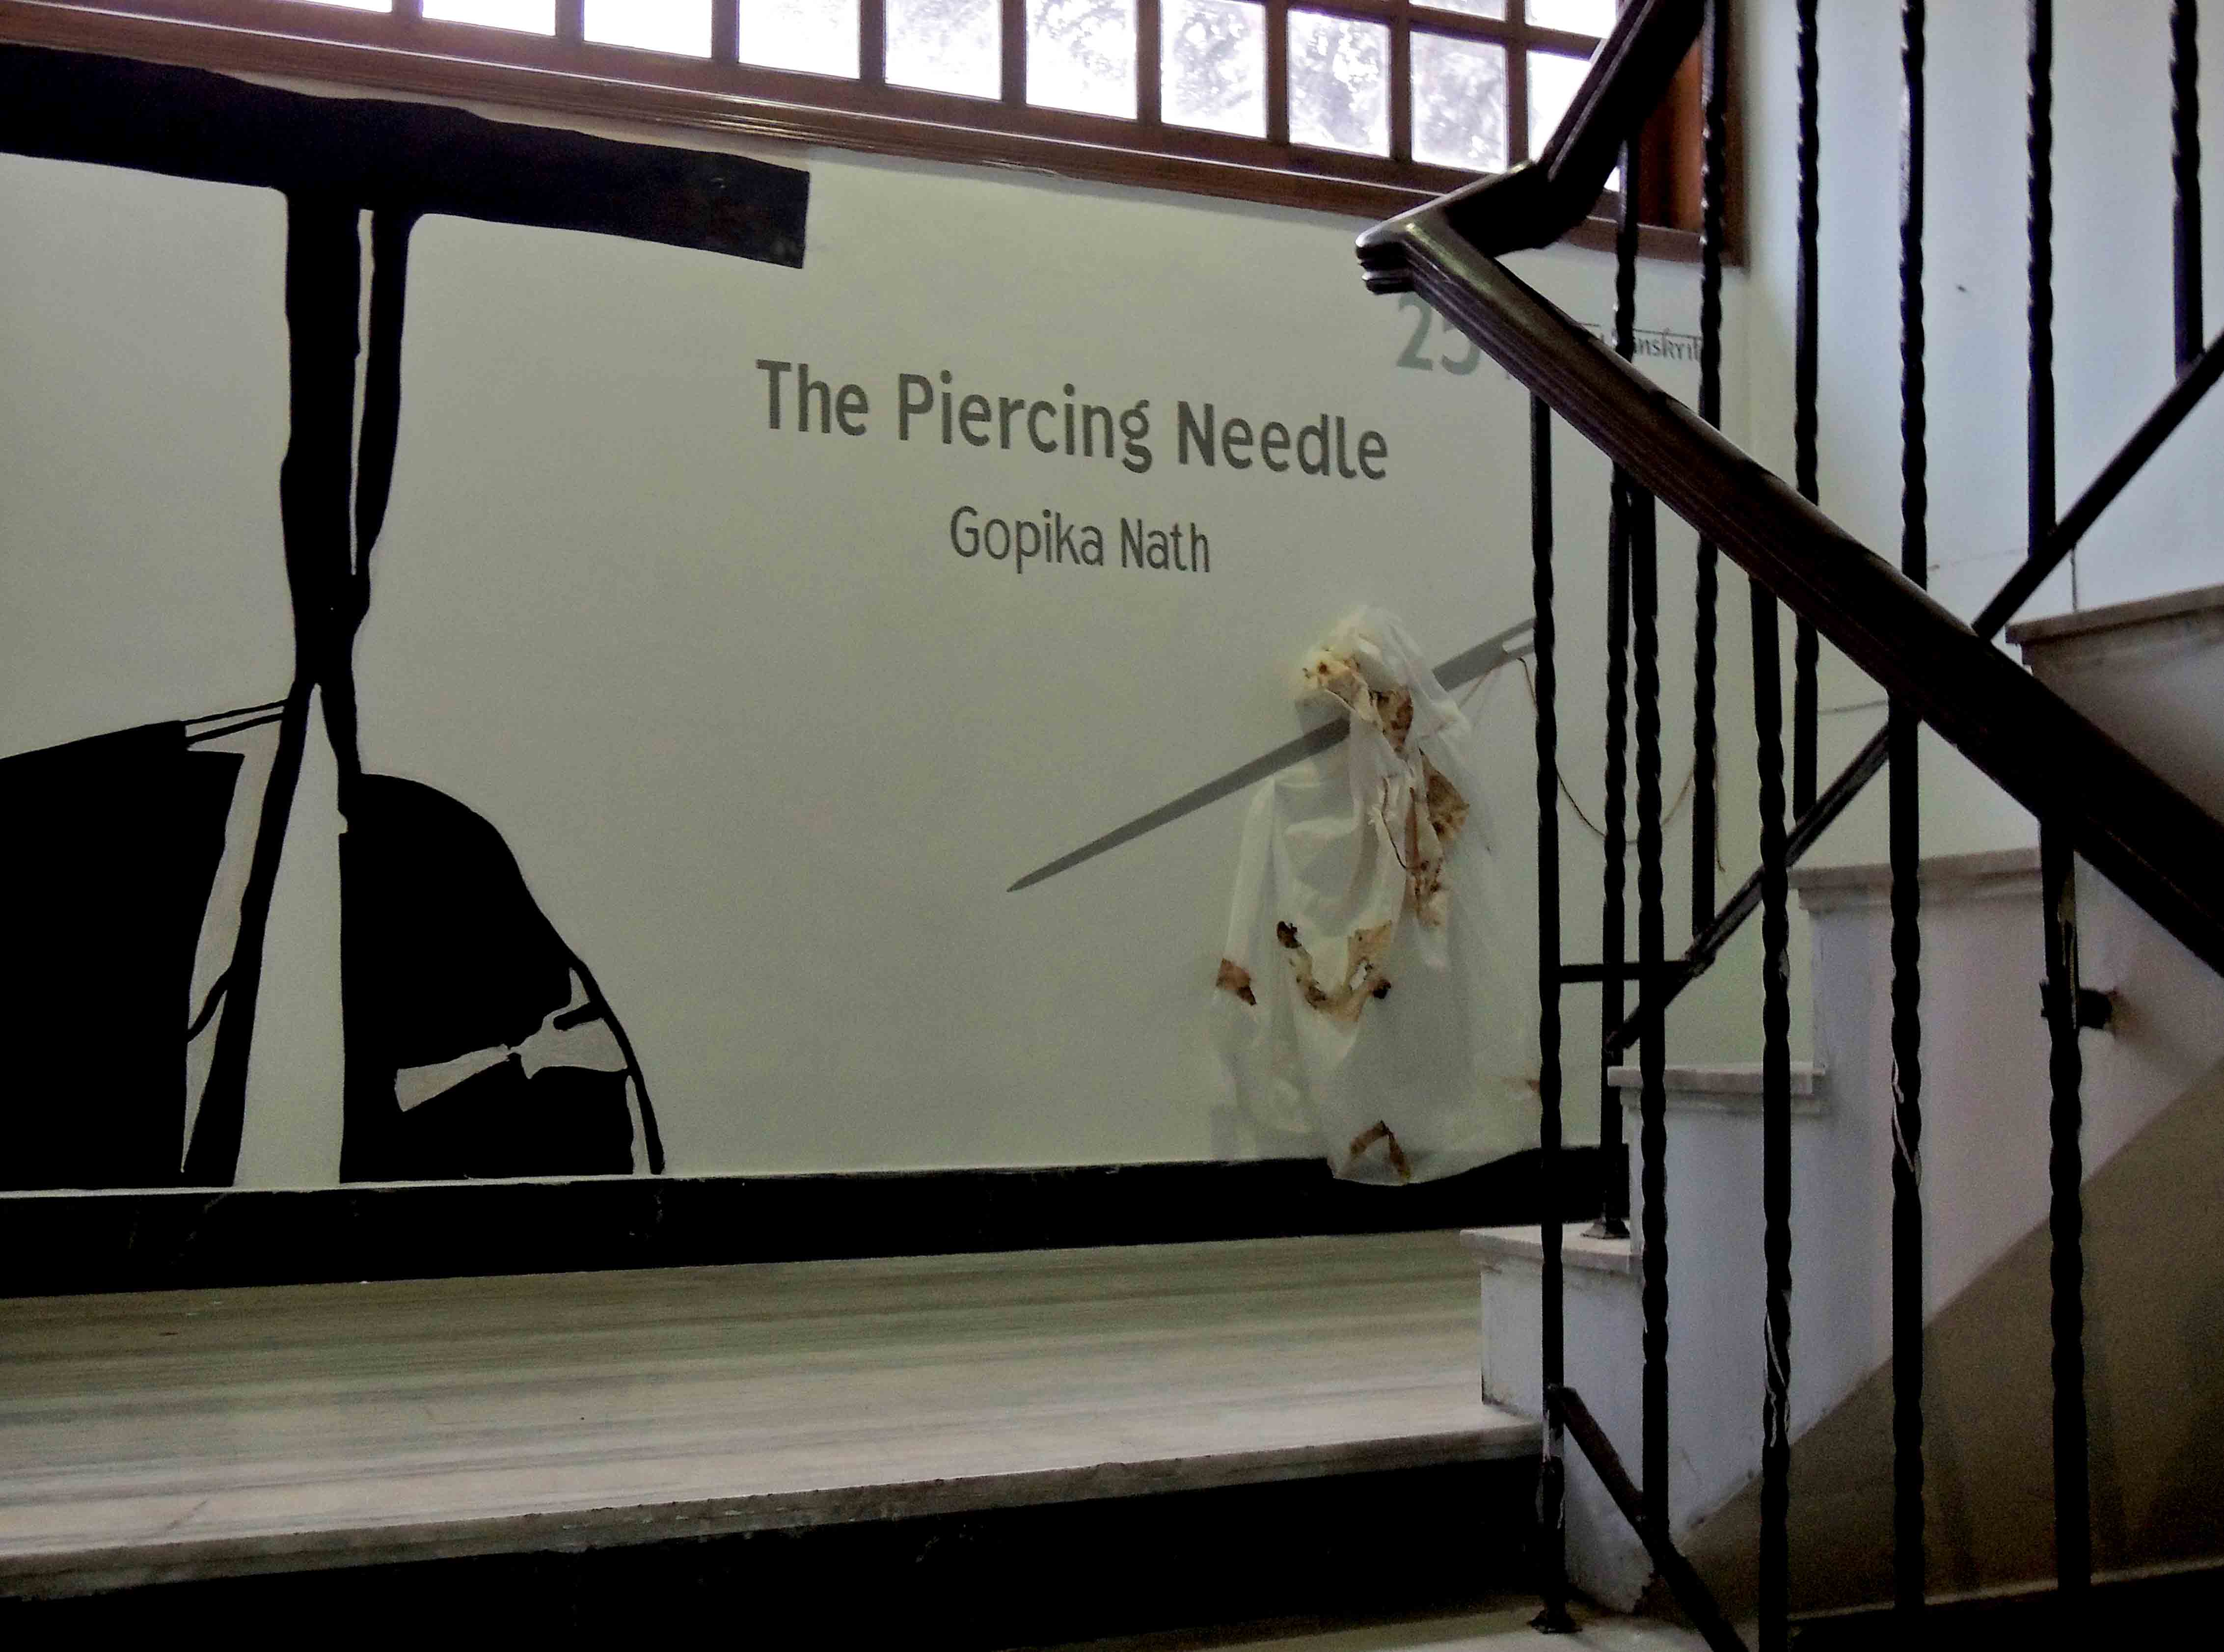 Image 3 : Display image of The Piercing Needle, In View: Display on staircase leading up to gallery, Photo credit: gopika nath